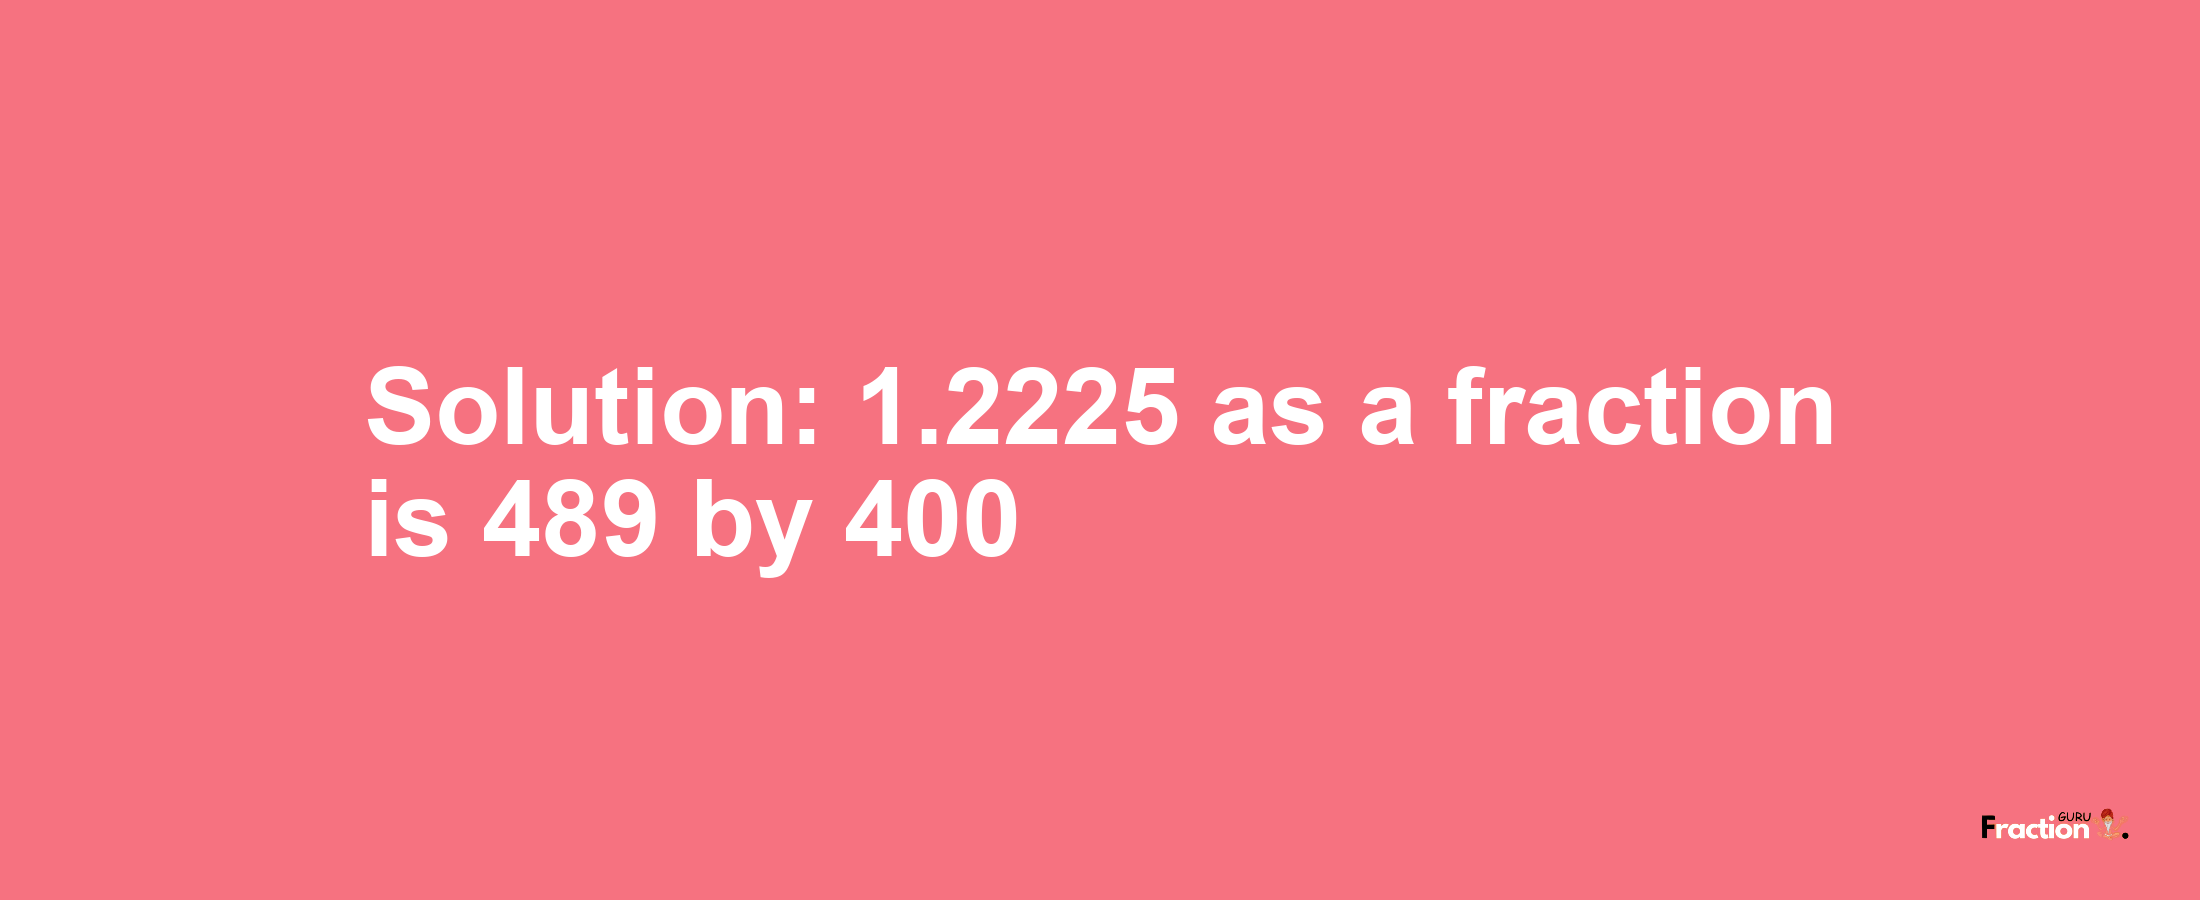 Solution:1.2225 as a fraction is 489/400